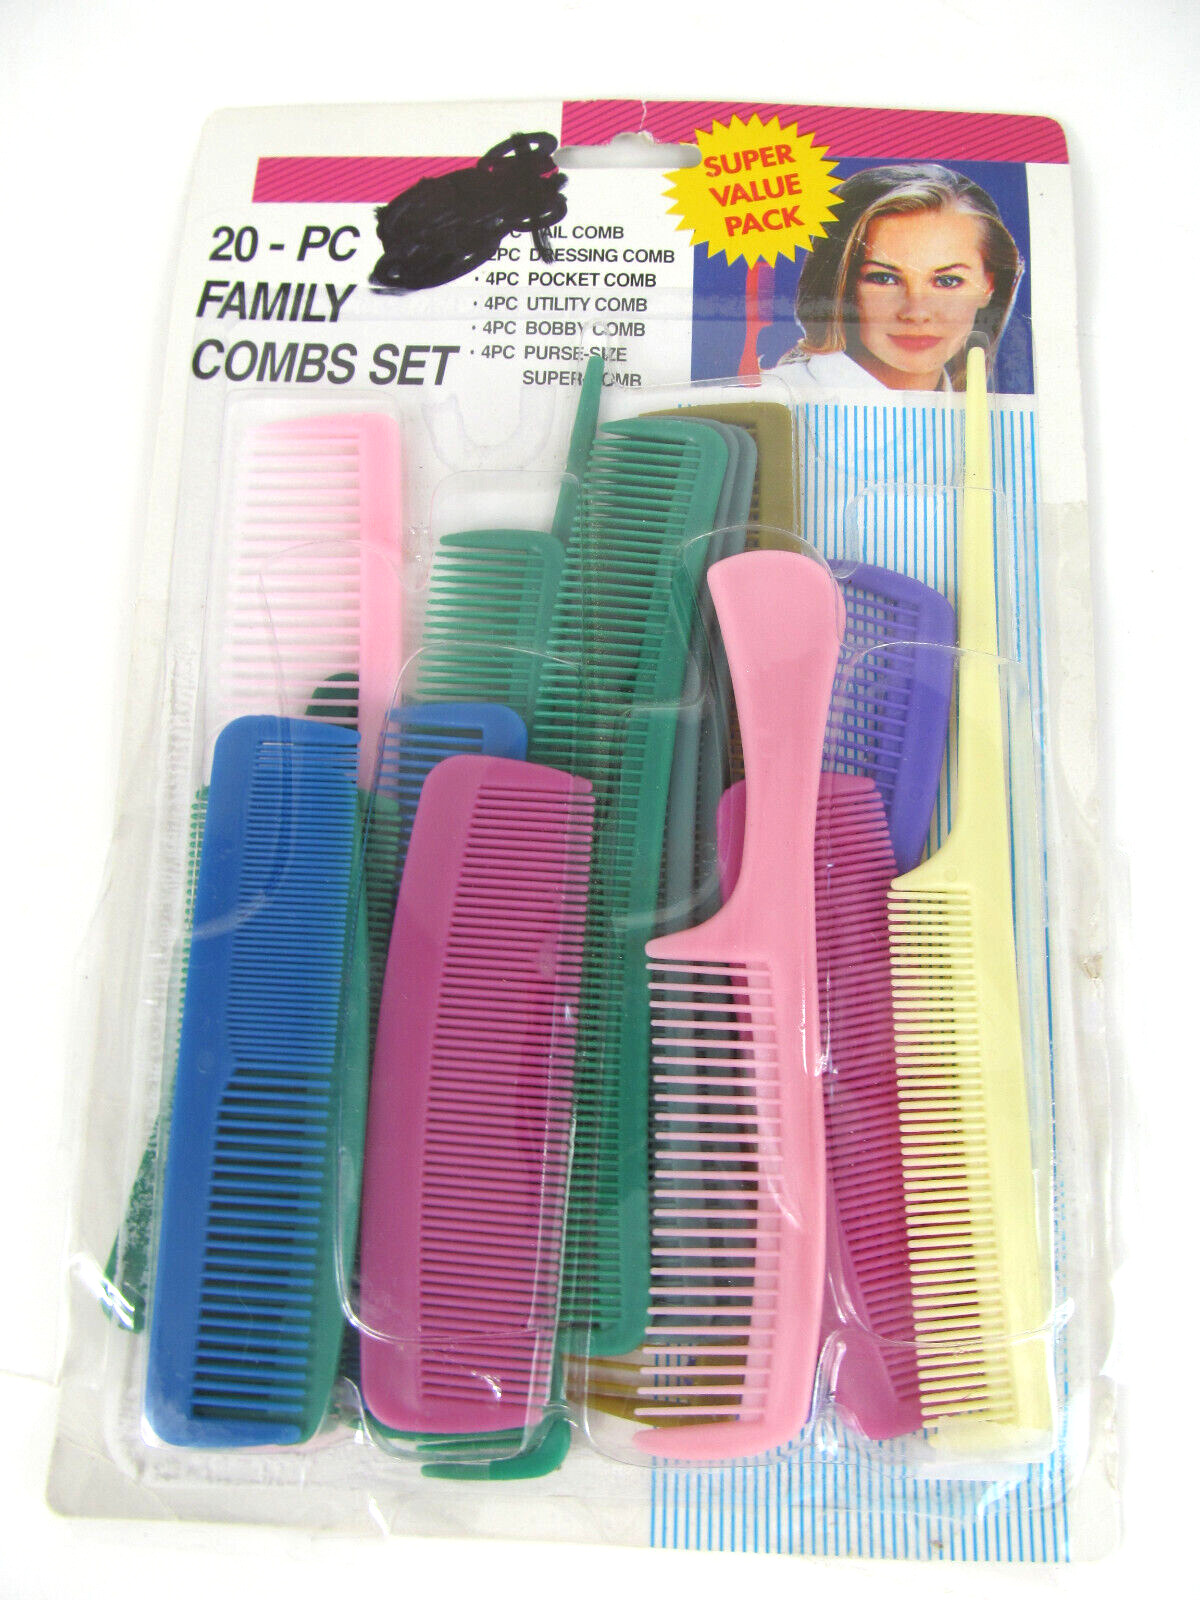 Vintage Unbreakable Family Comb Set Value Pack Plastic Assorted Sizes G